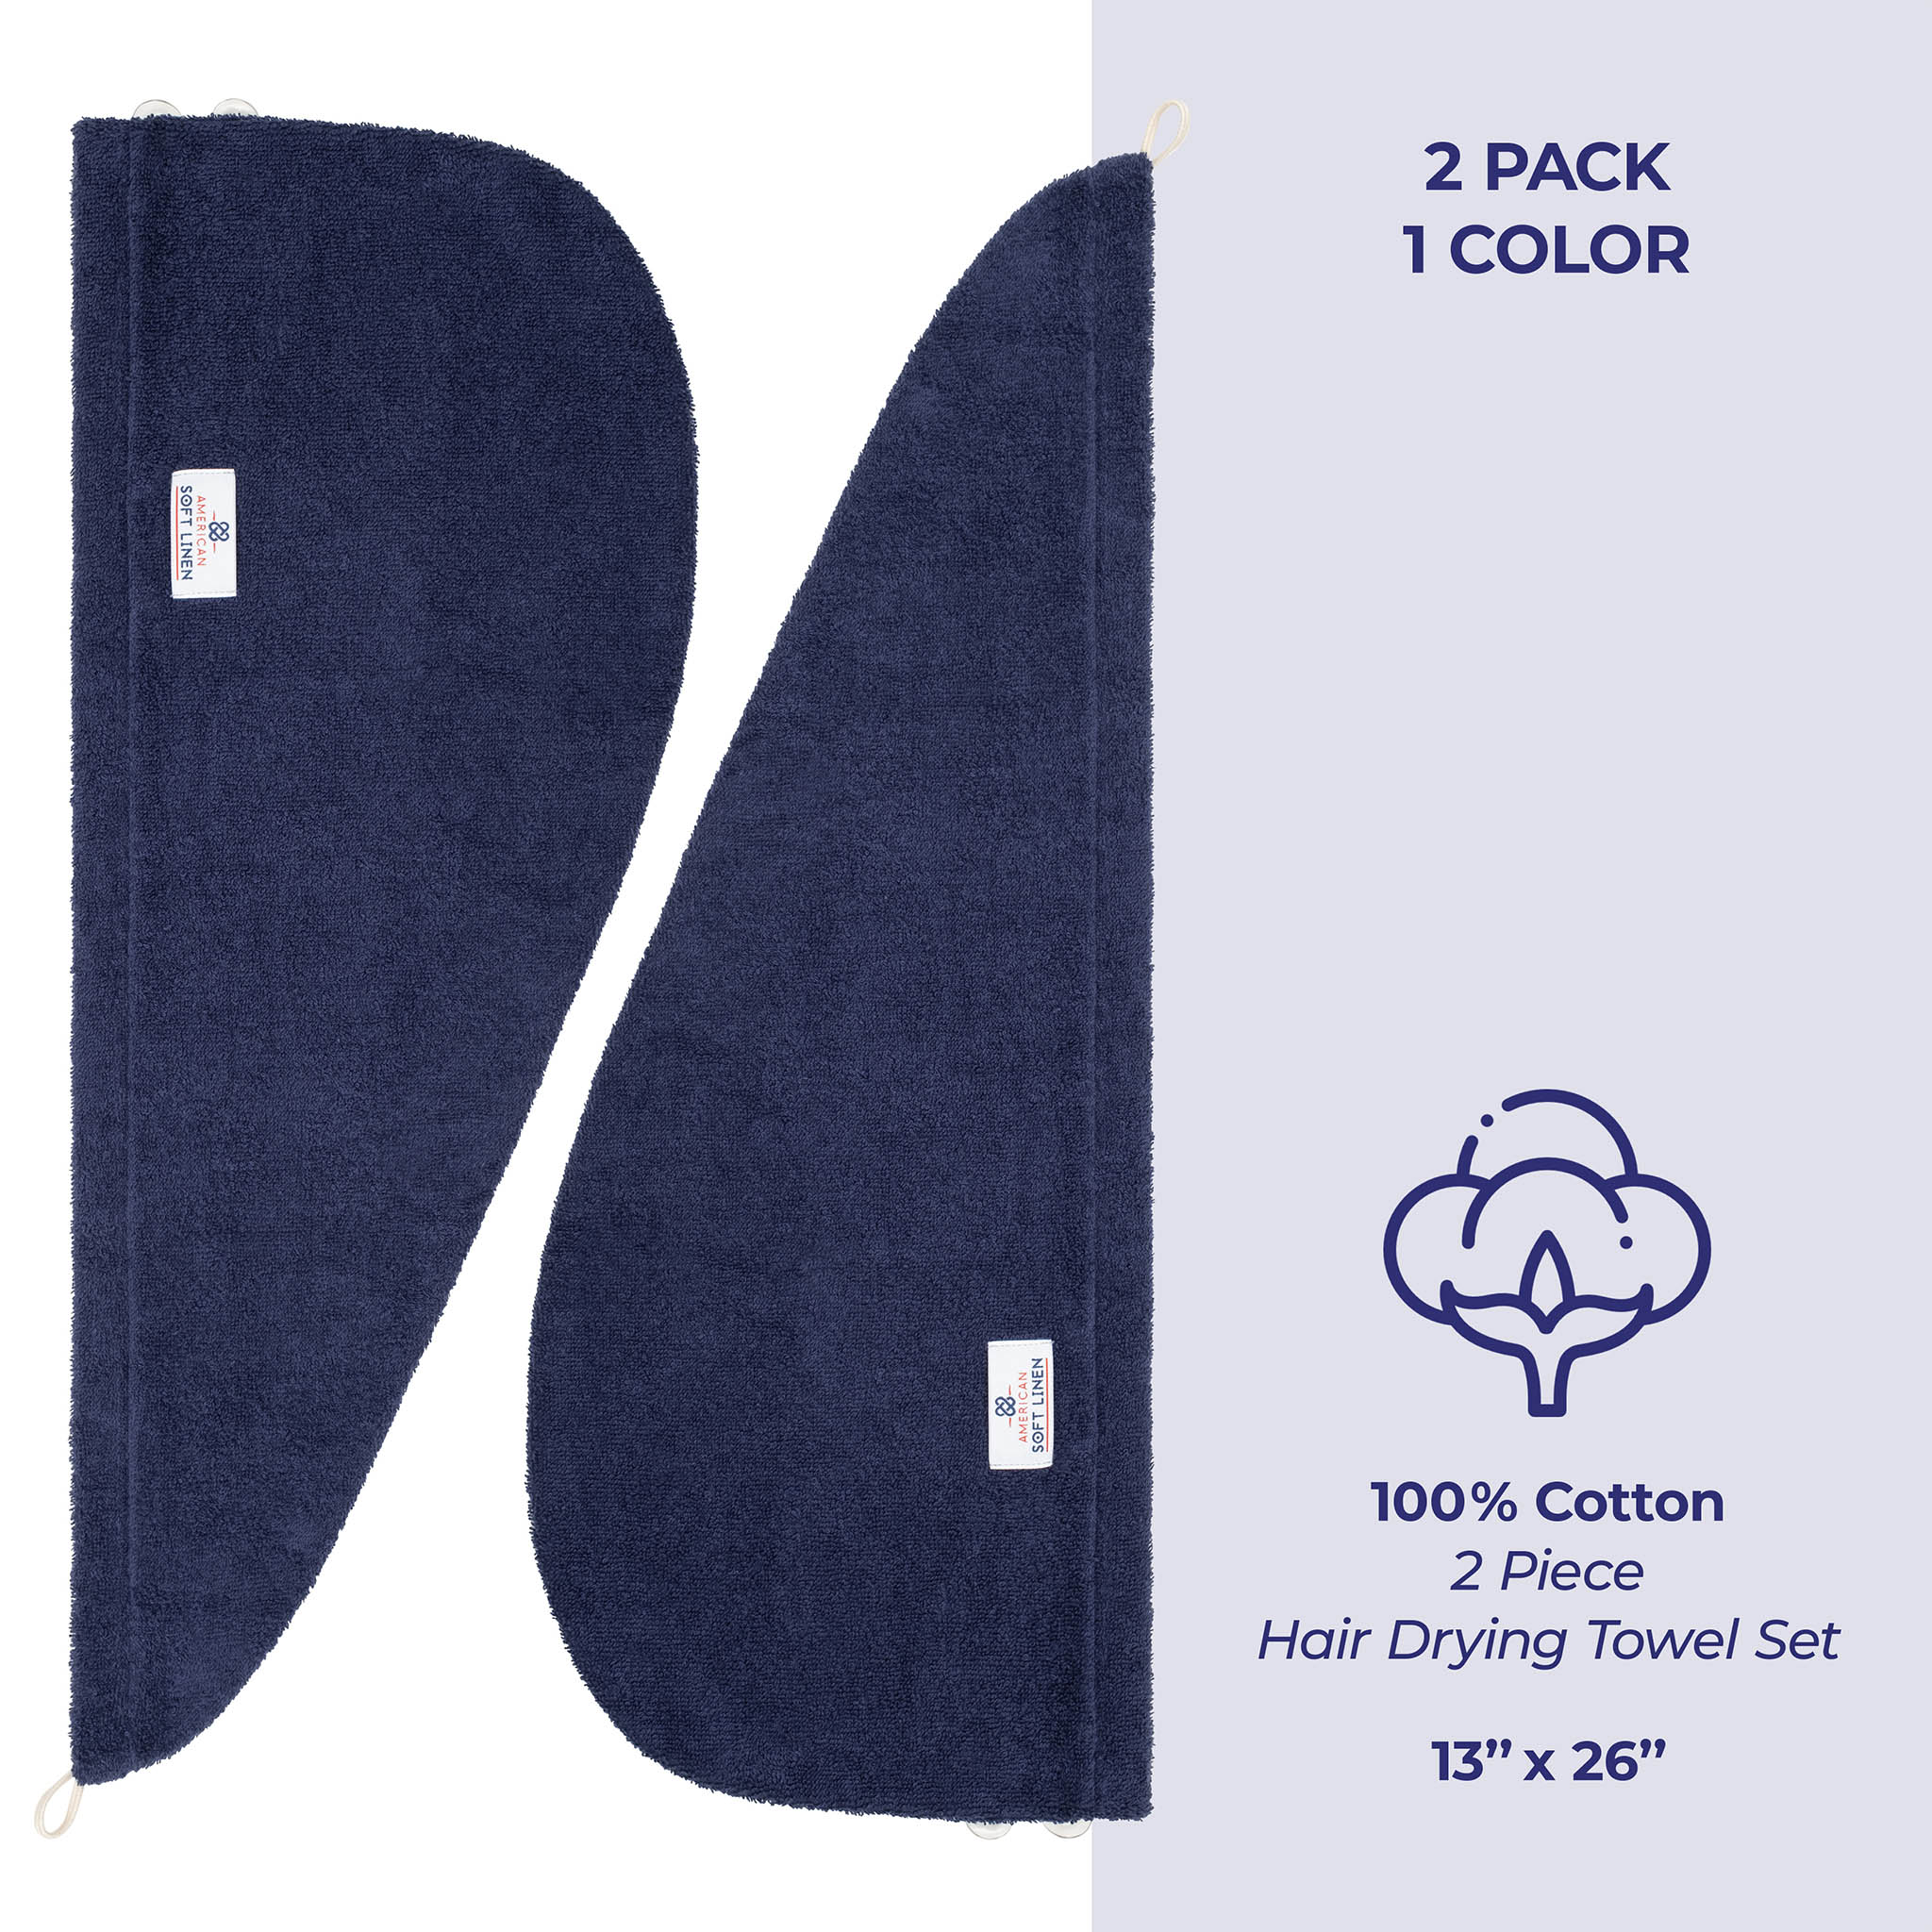 American Soft Linen 100% Cotton Hair Drying Towels for Women 2 pack 75 set case pack navy blue-4